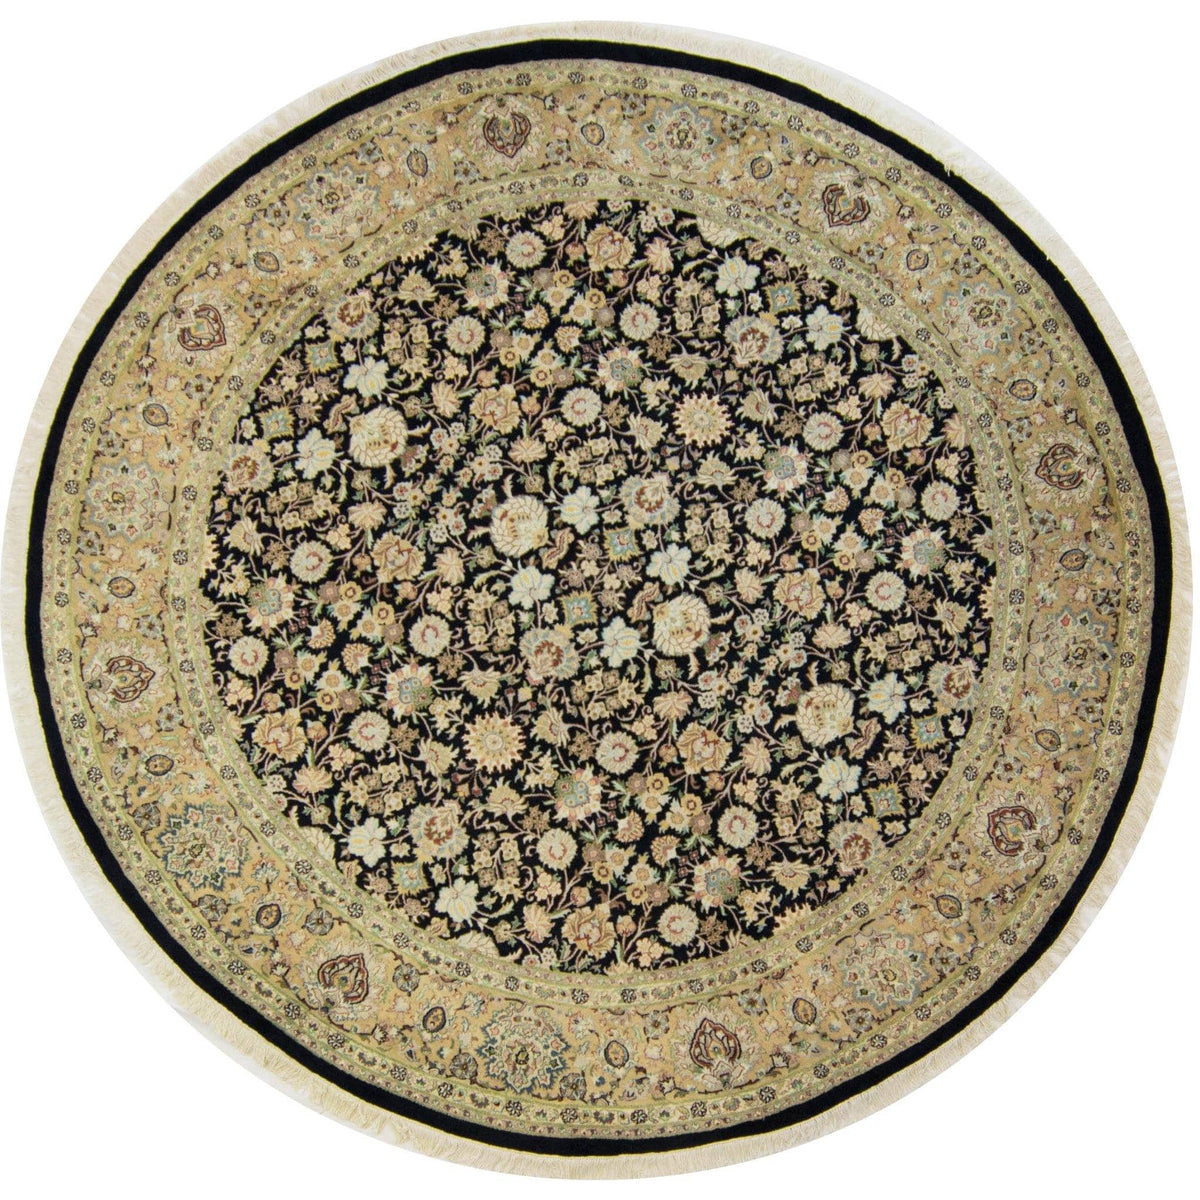 Fine Hand-knotted Wool and Silk Kashan Round Rug 244cm x 248cm